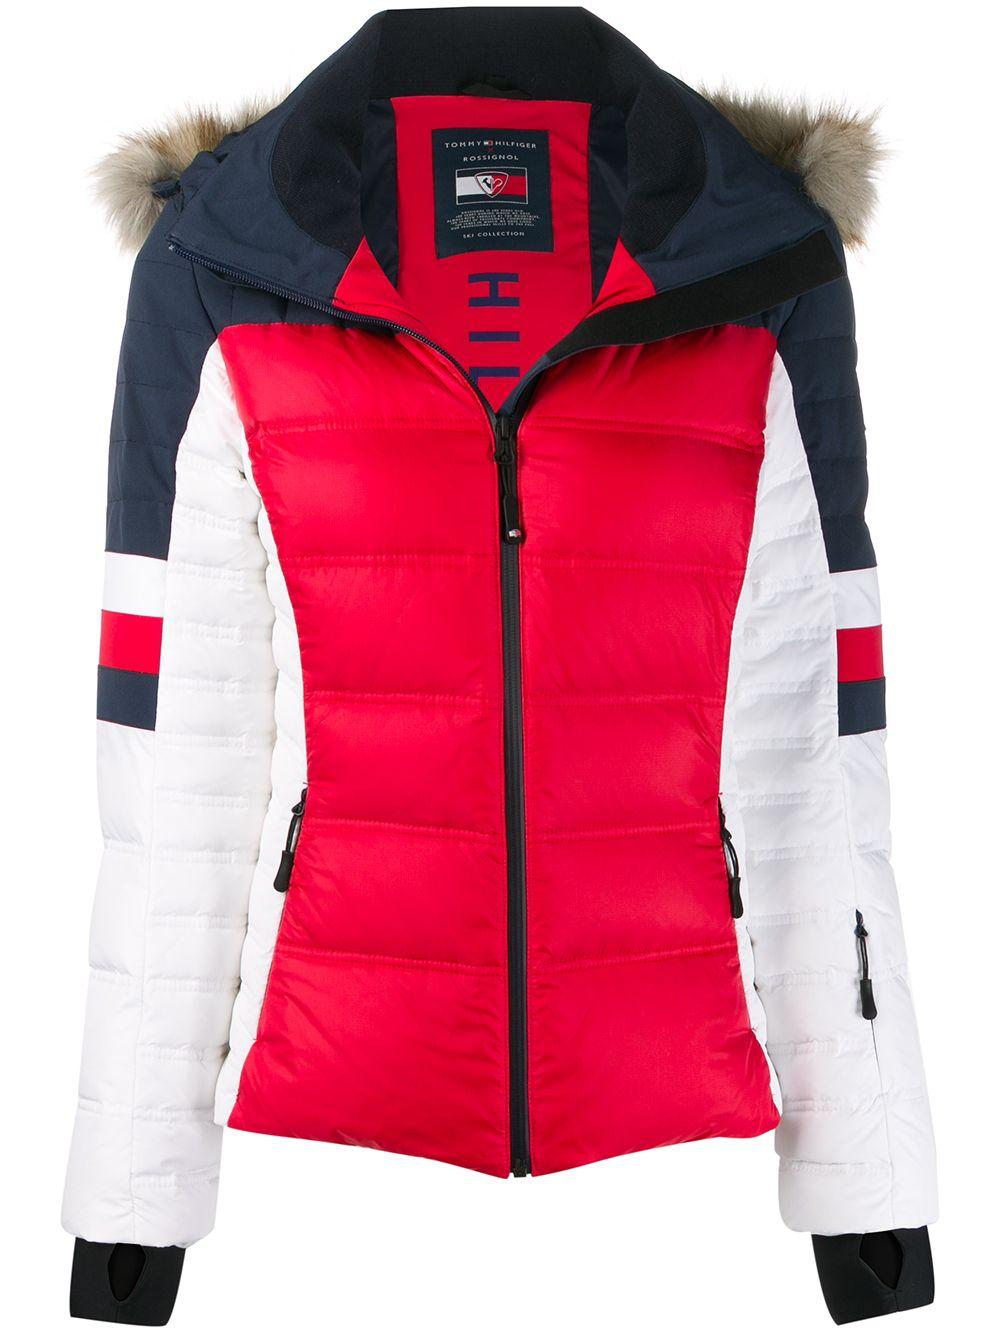 Rossignol Synthetic X Tommy Hilfiger 2-way Stretch Jacket in Red - Lyst